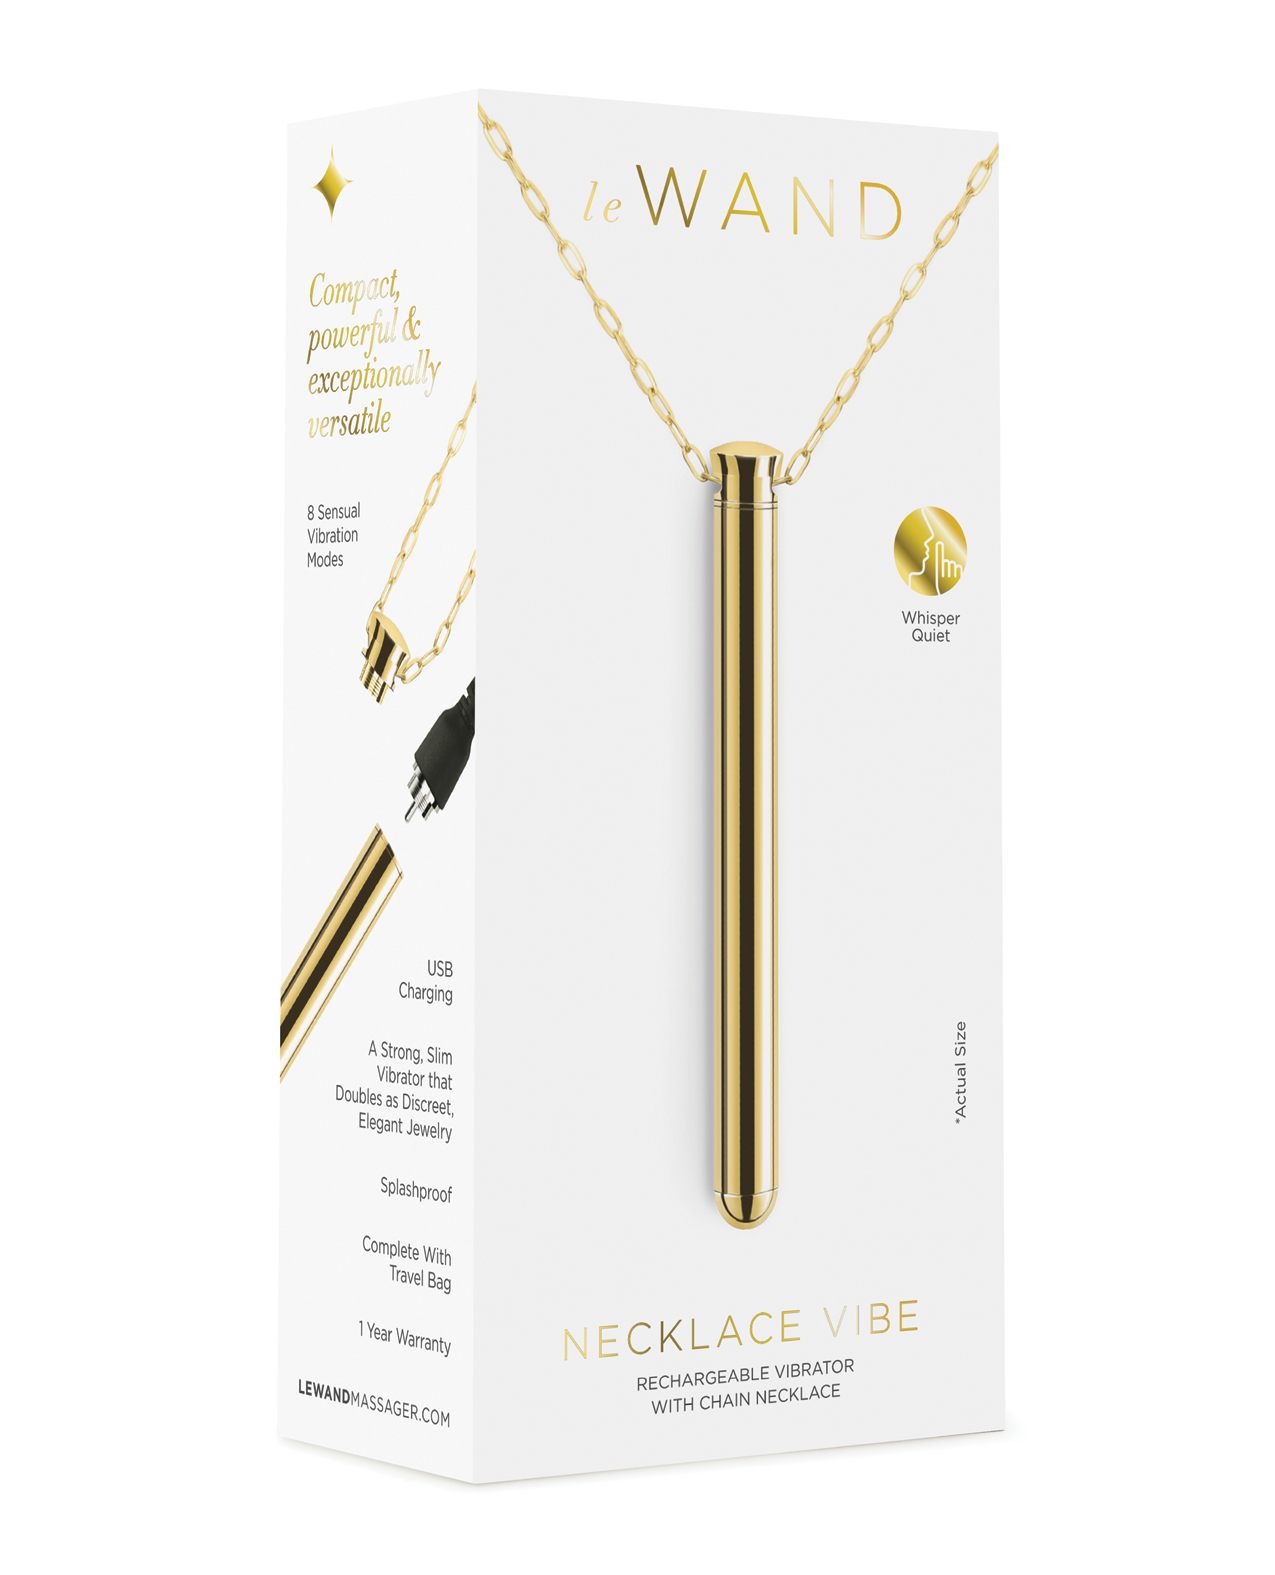 Le Wand Necklace Vibe in Gold on a white box